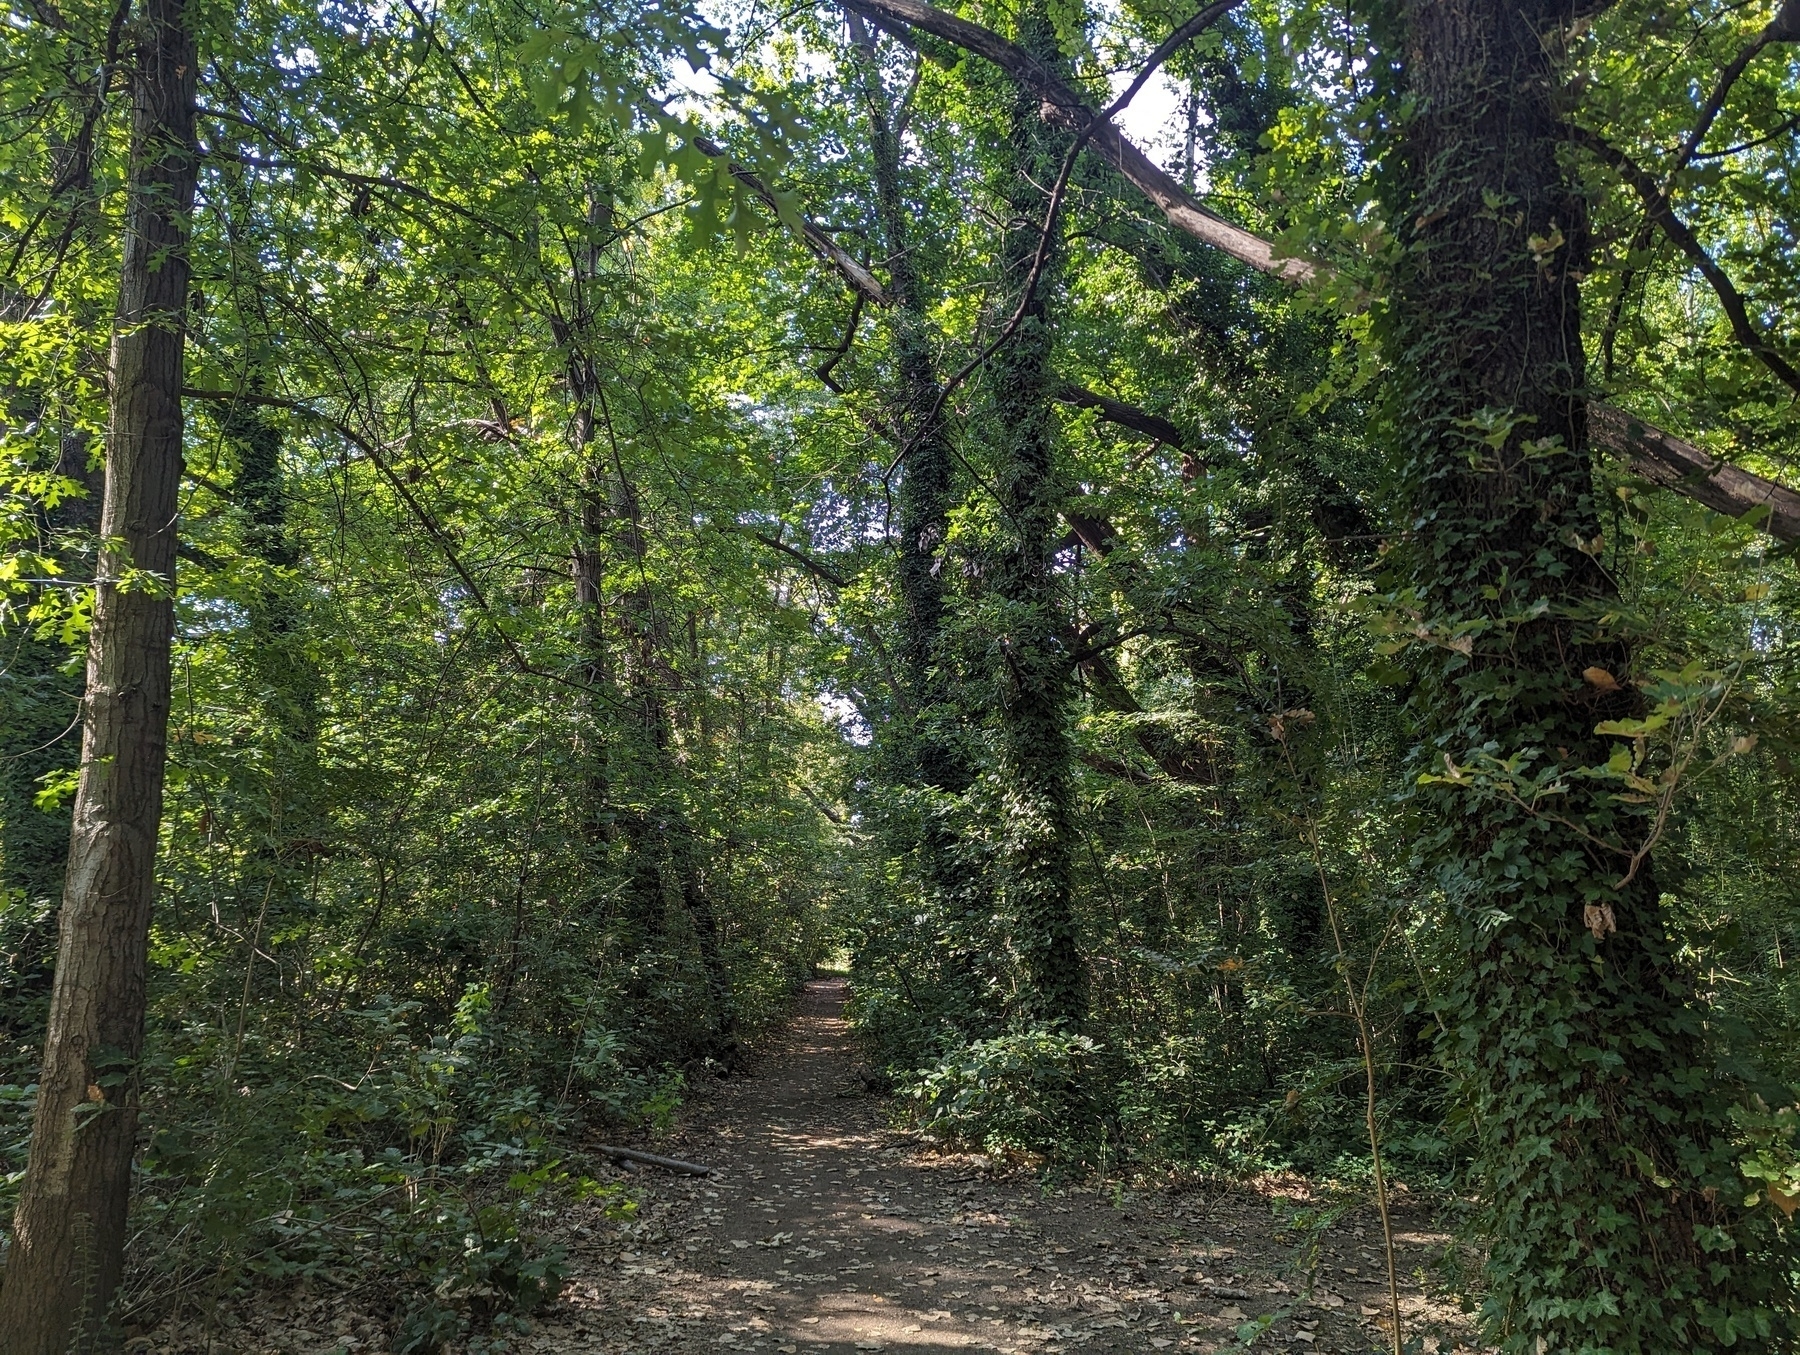 Path shaded by oak trees